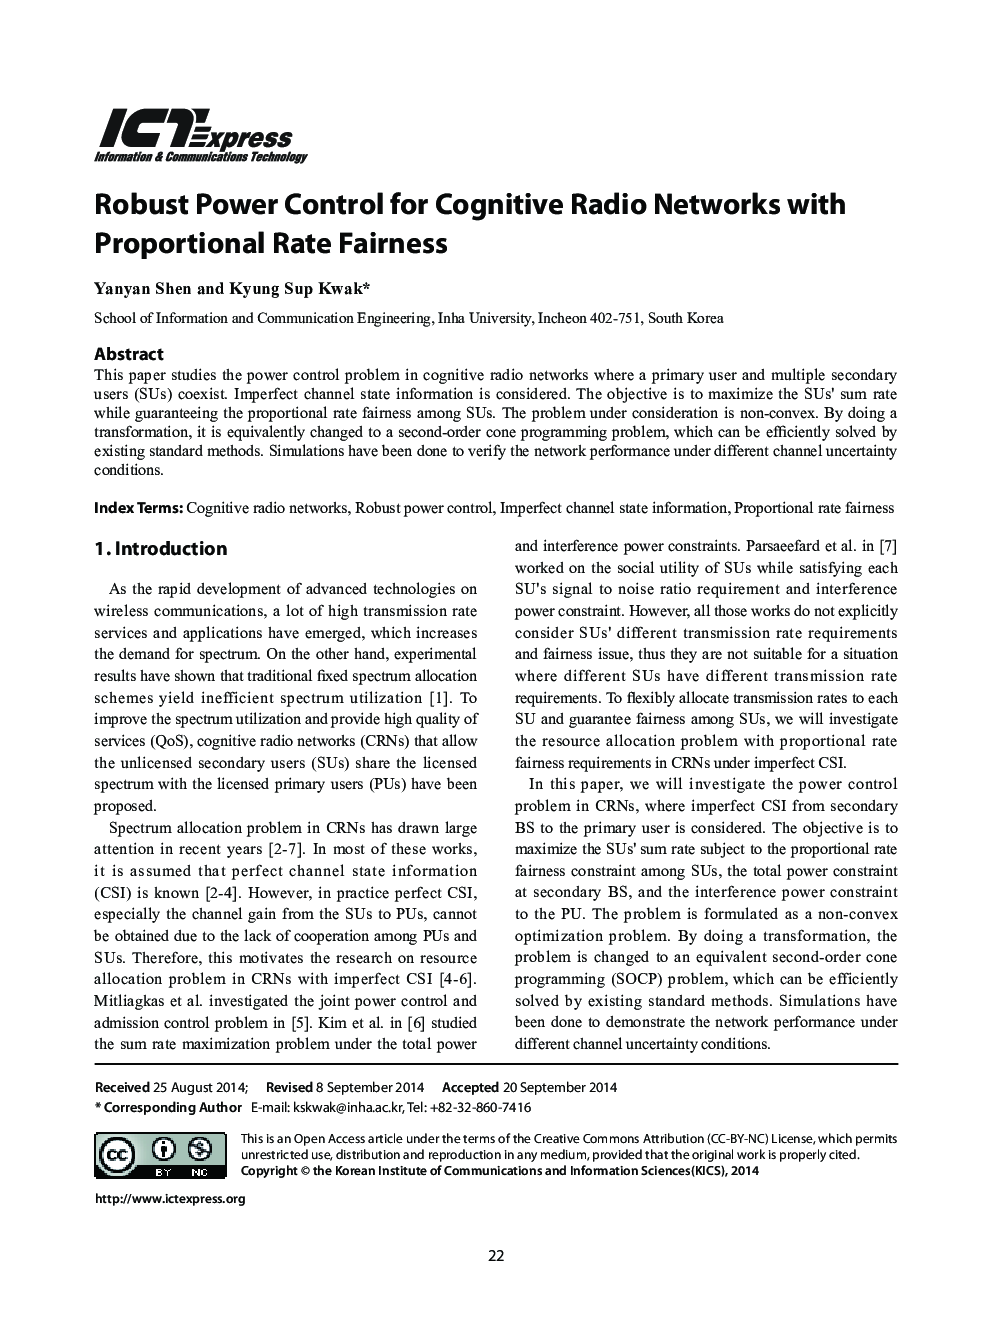 Robust Power Control for Cognitive Radio Networks with Proportional Rate Fairness 